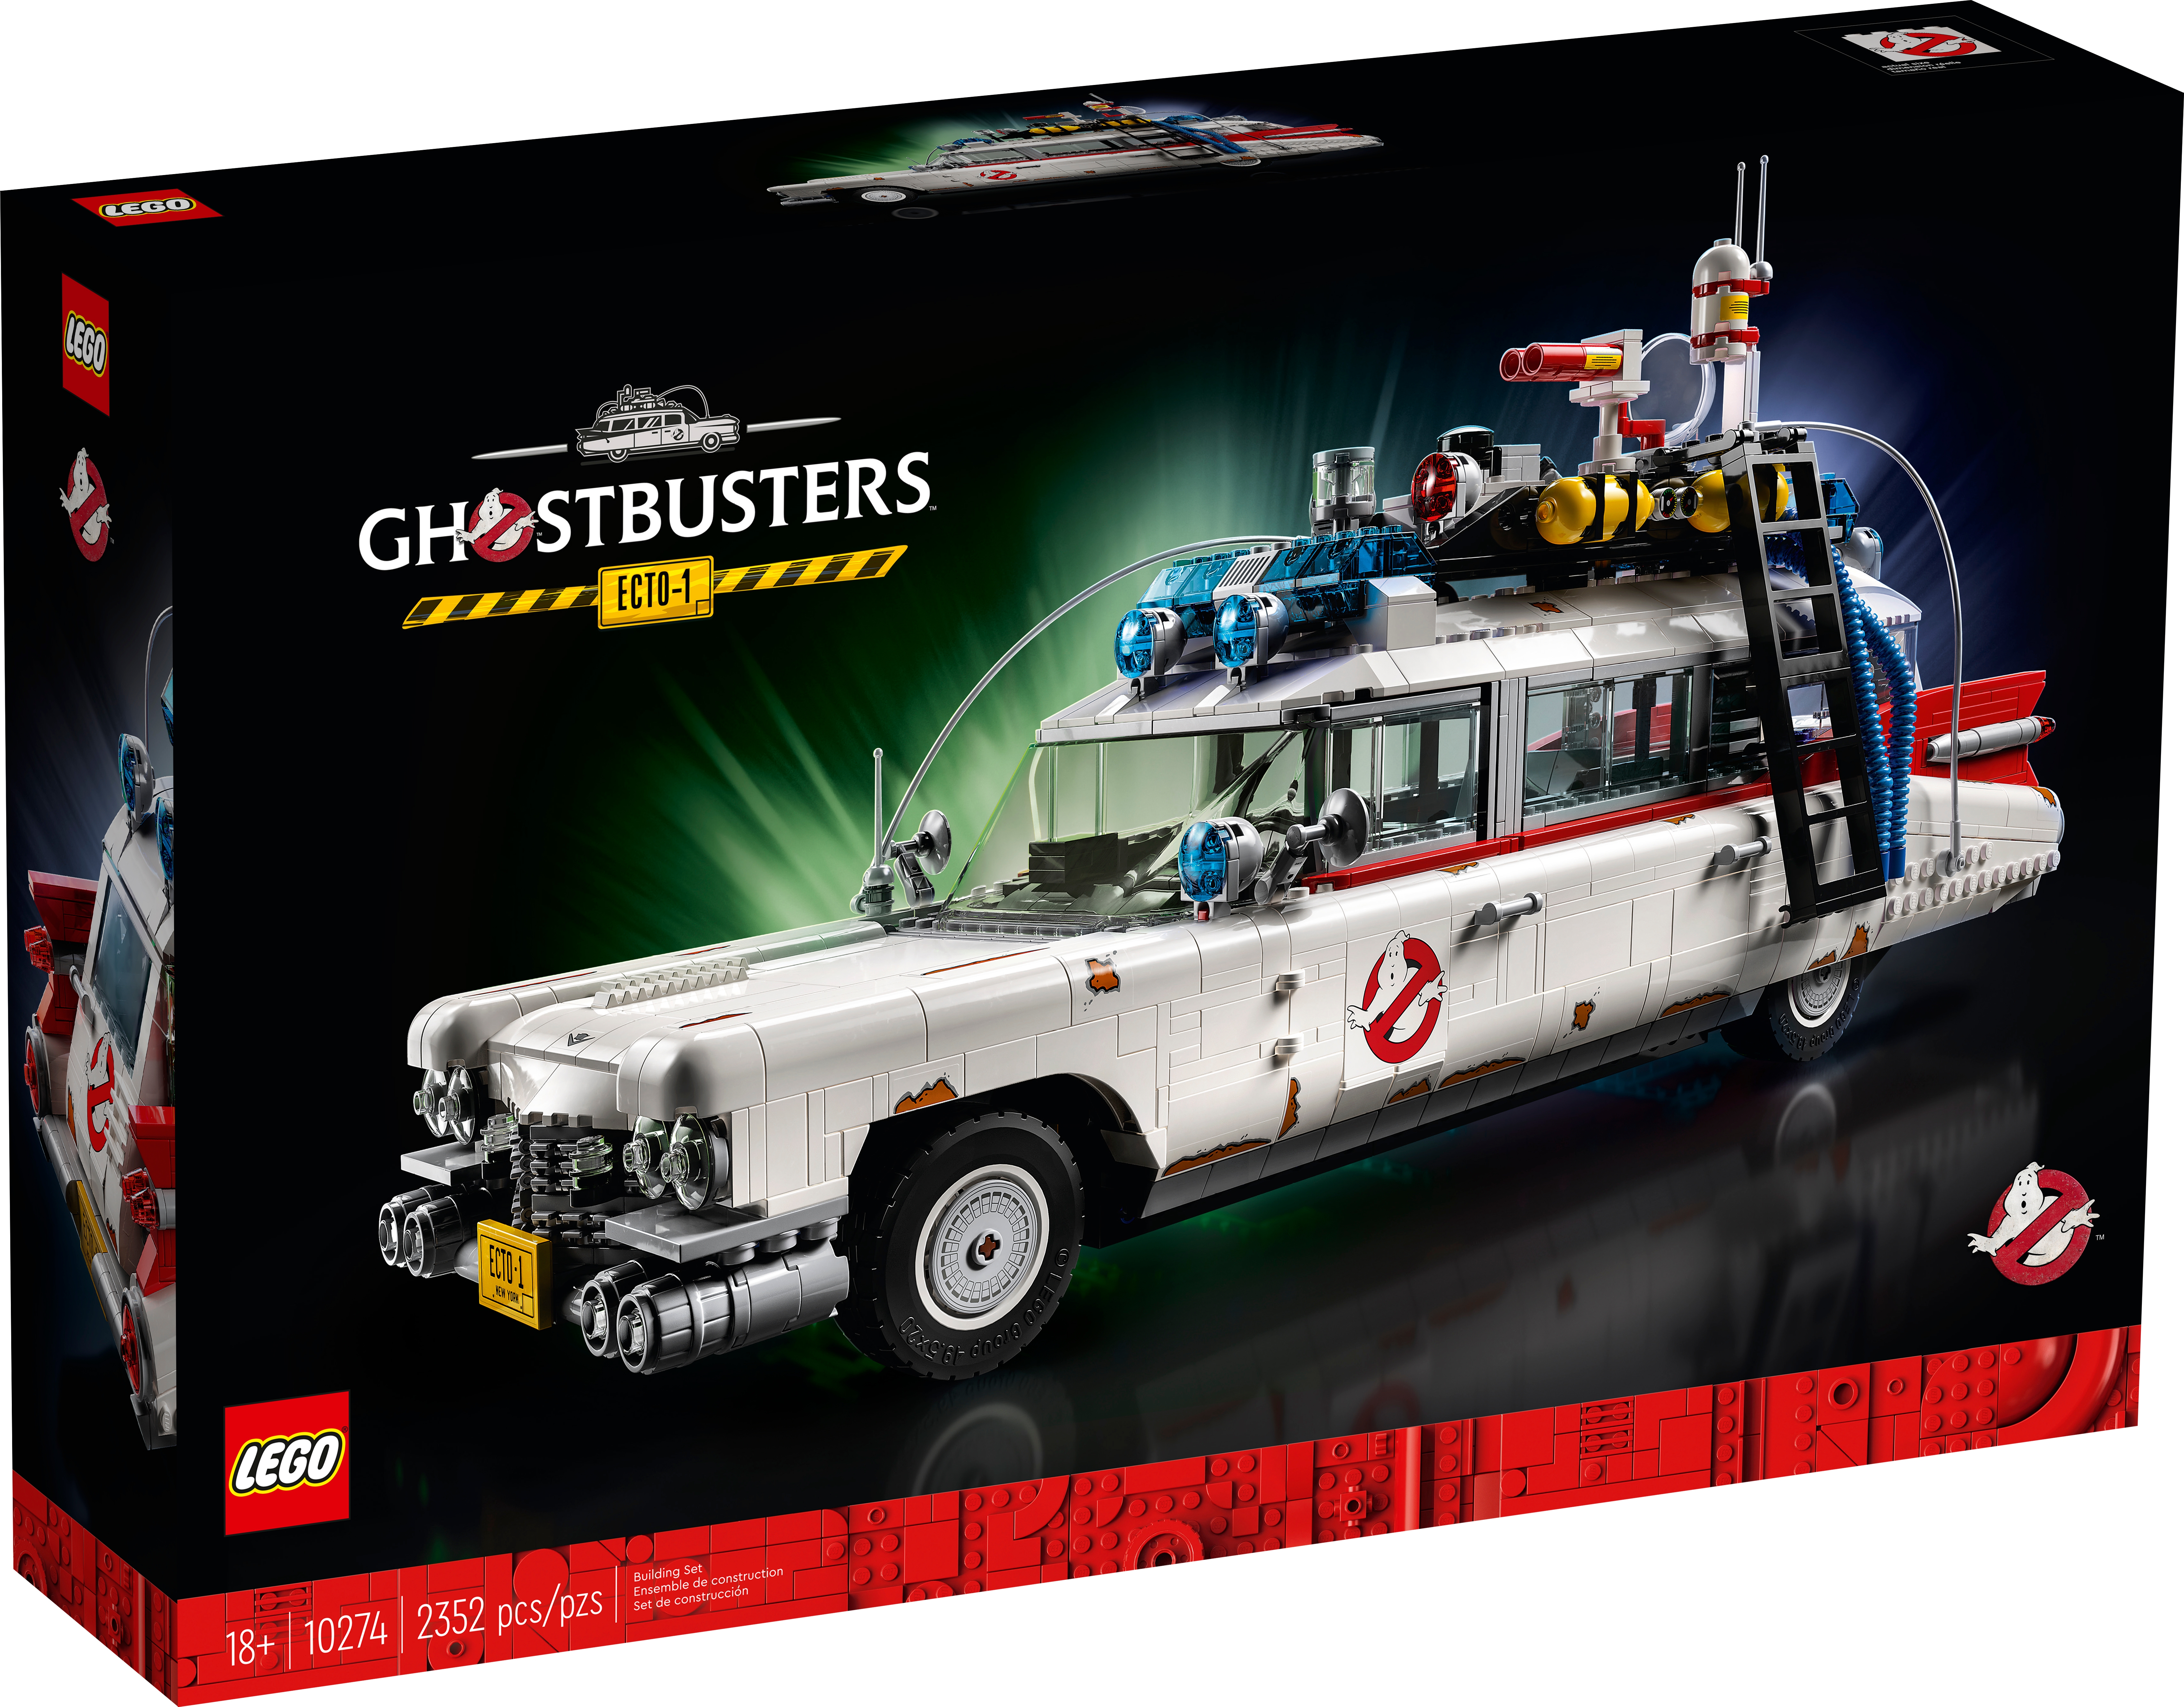 New, Female-Powered 'Ghostbusters' Lego Set Unleashed (Spoiler Alert!)